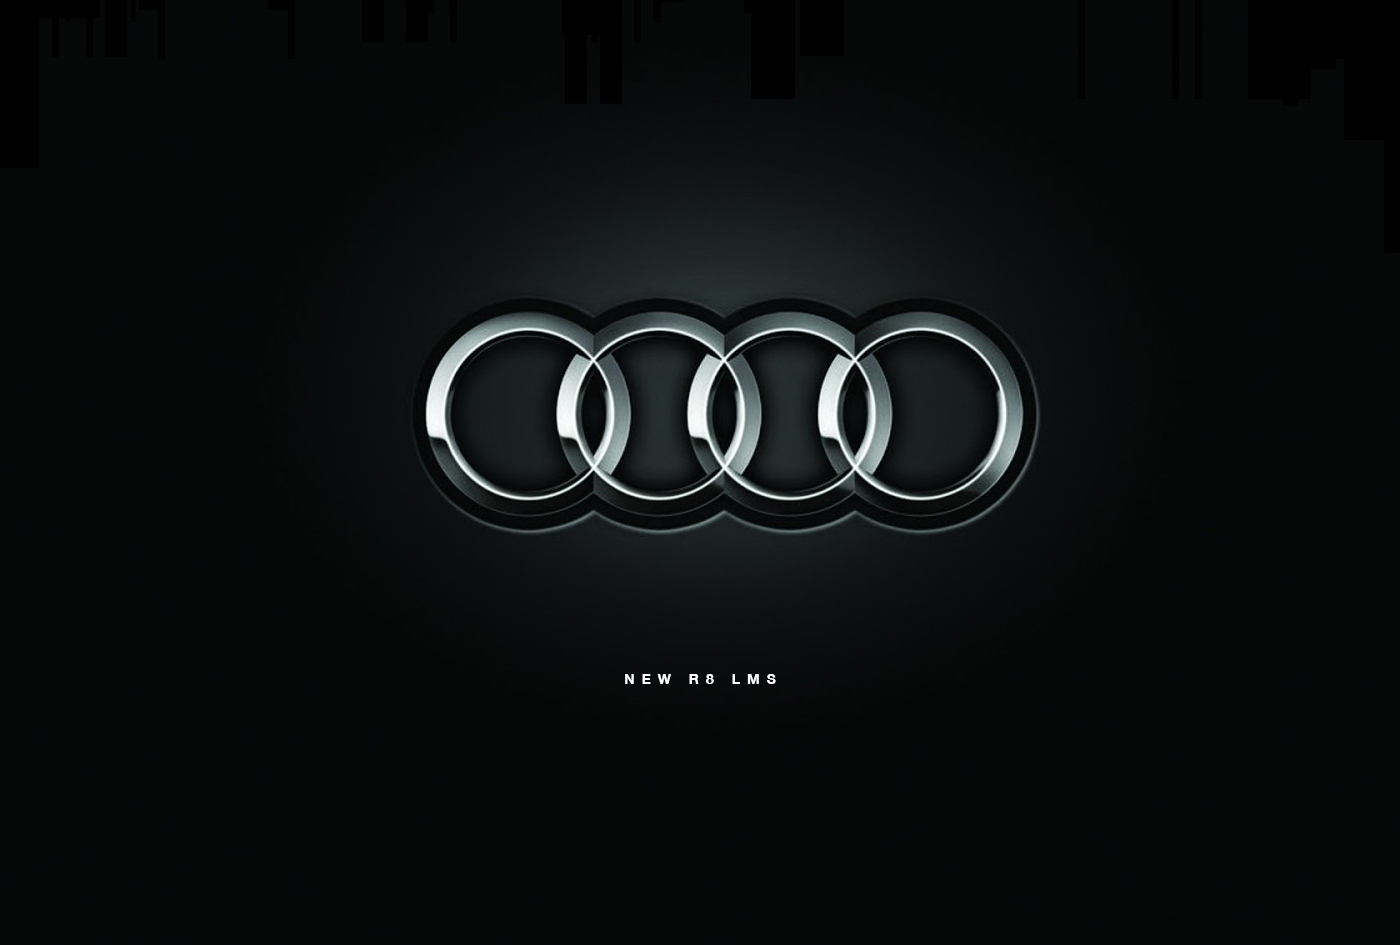 Audi brand Experience mobile design user experience quattro Photography  digital application